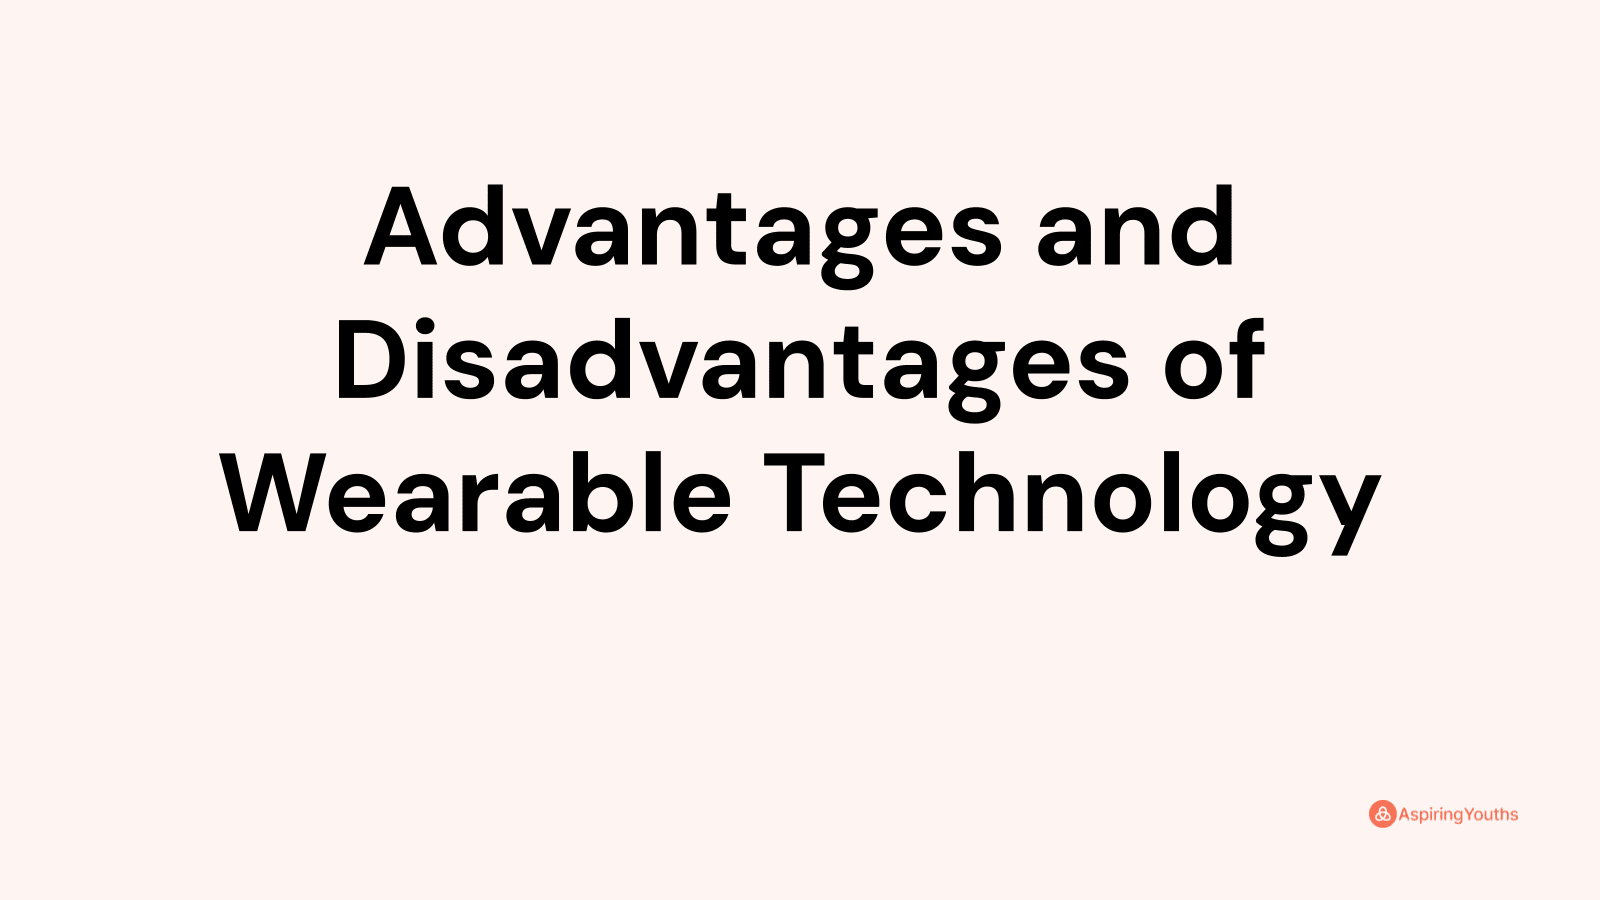 Advantages and disadvantages of Wearable Technology